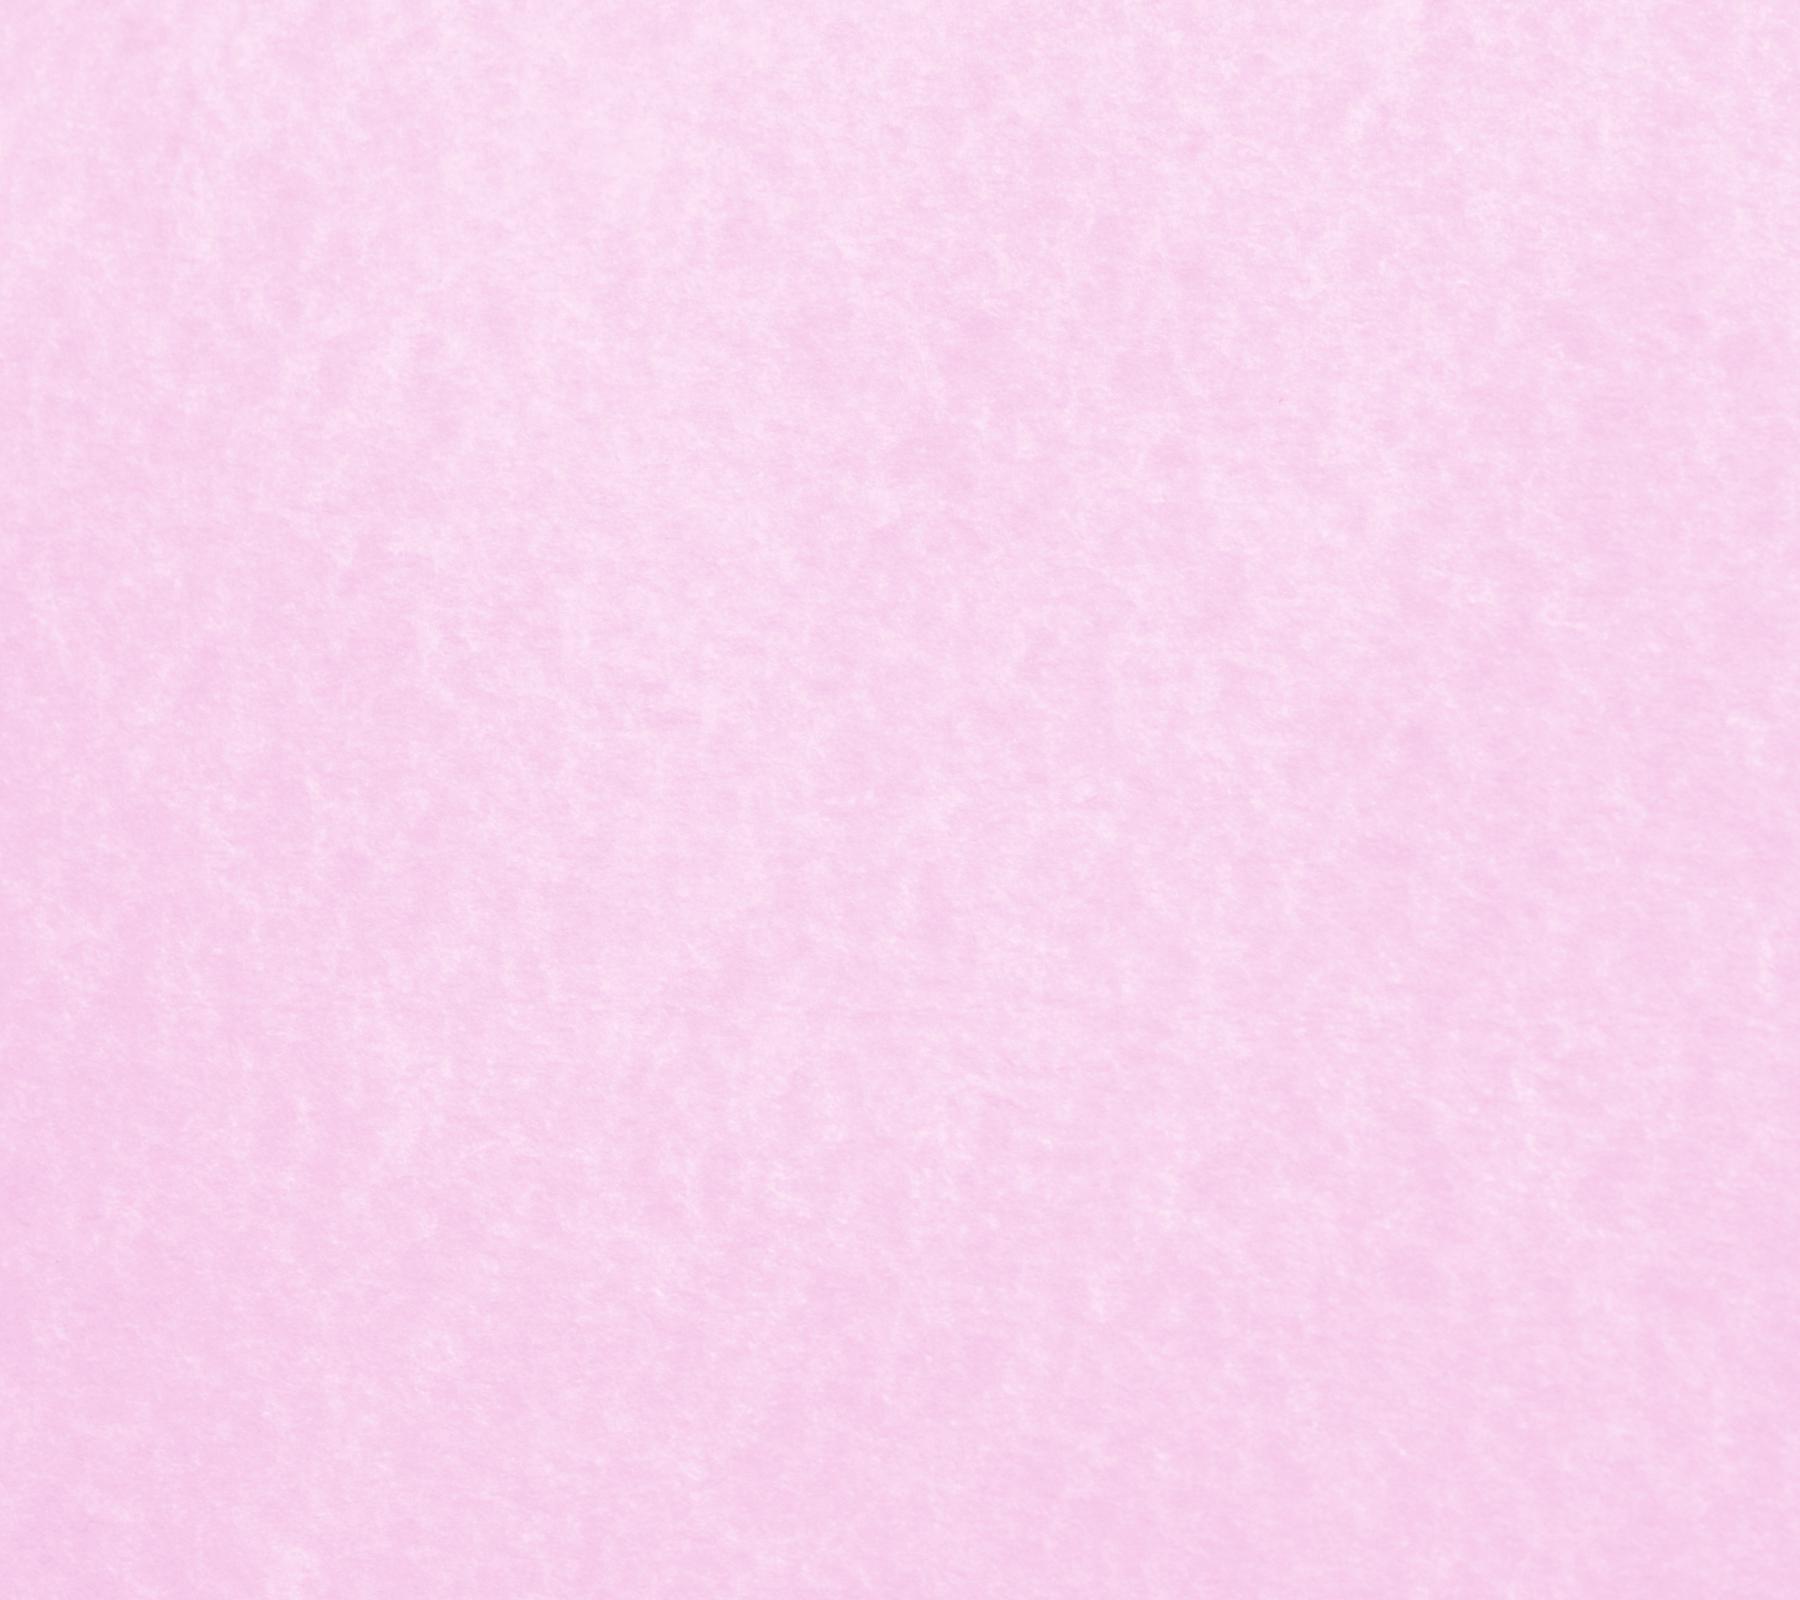 background wallpaper image light pink parchment paper background 1800x1600